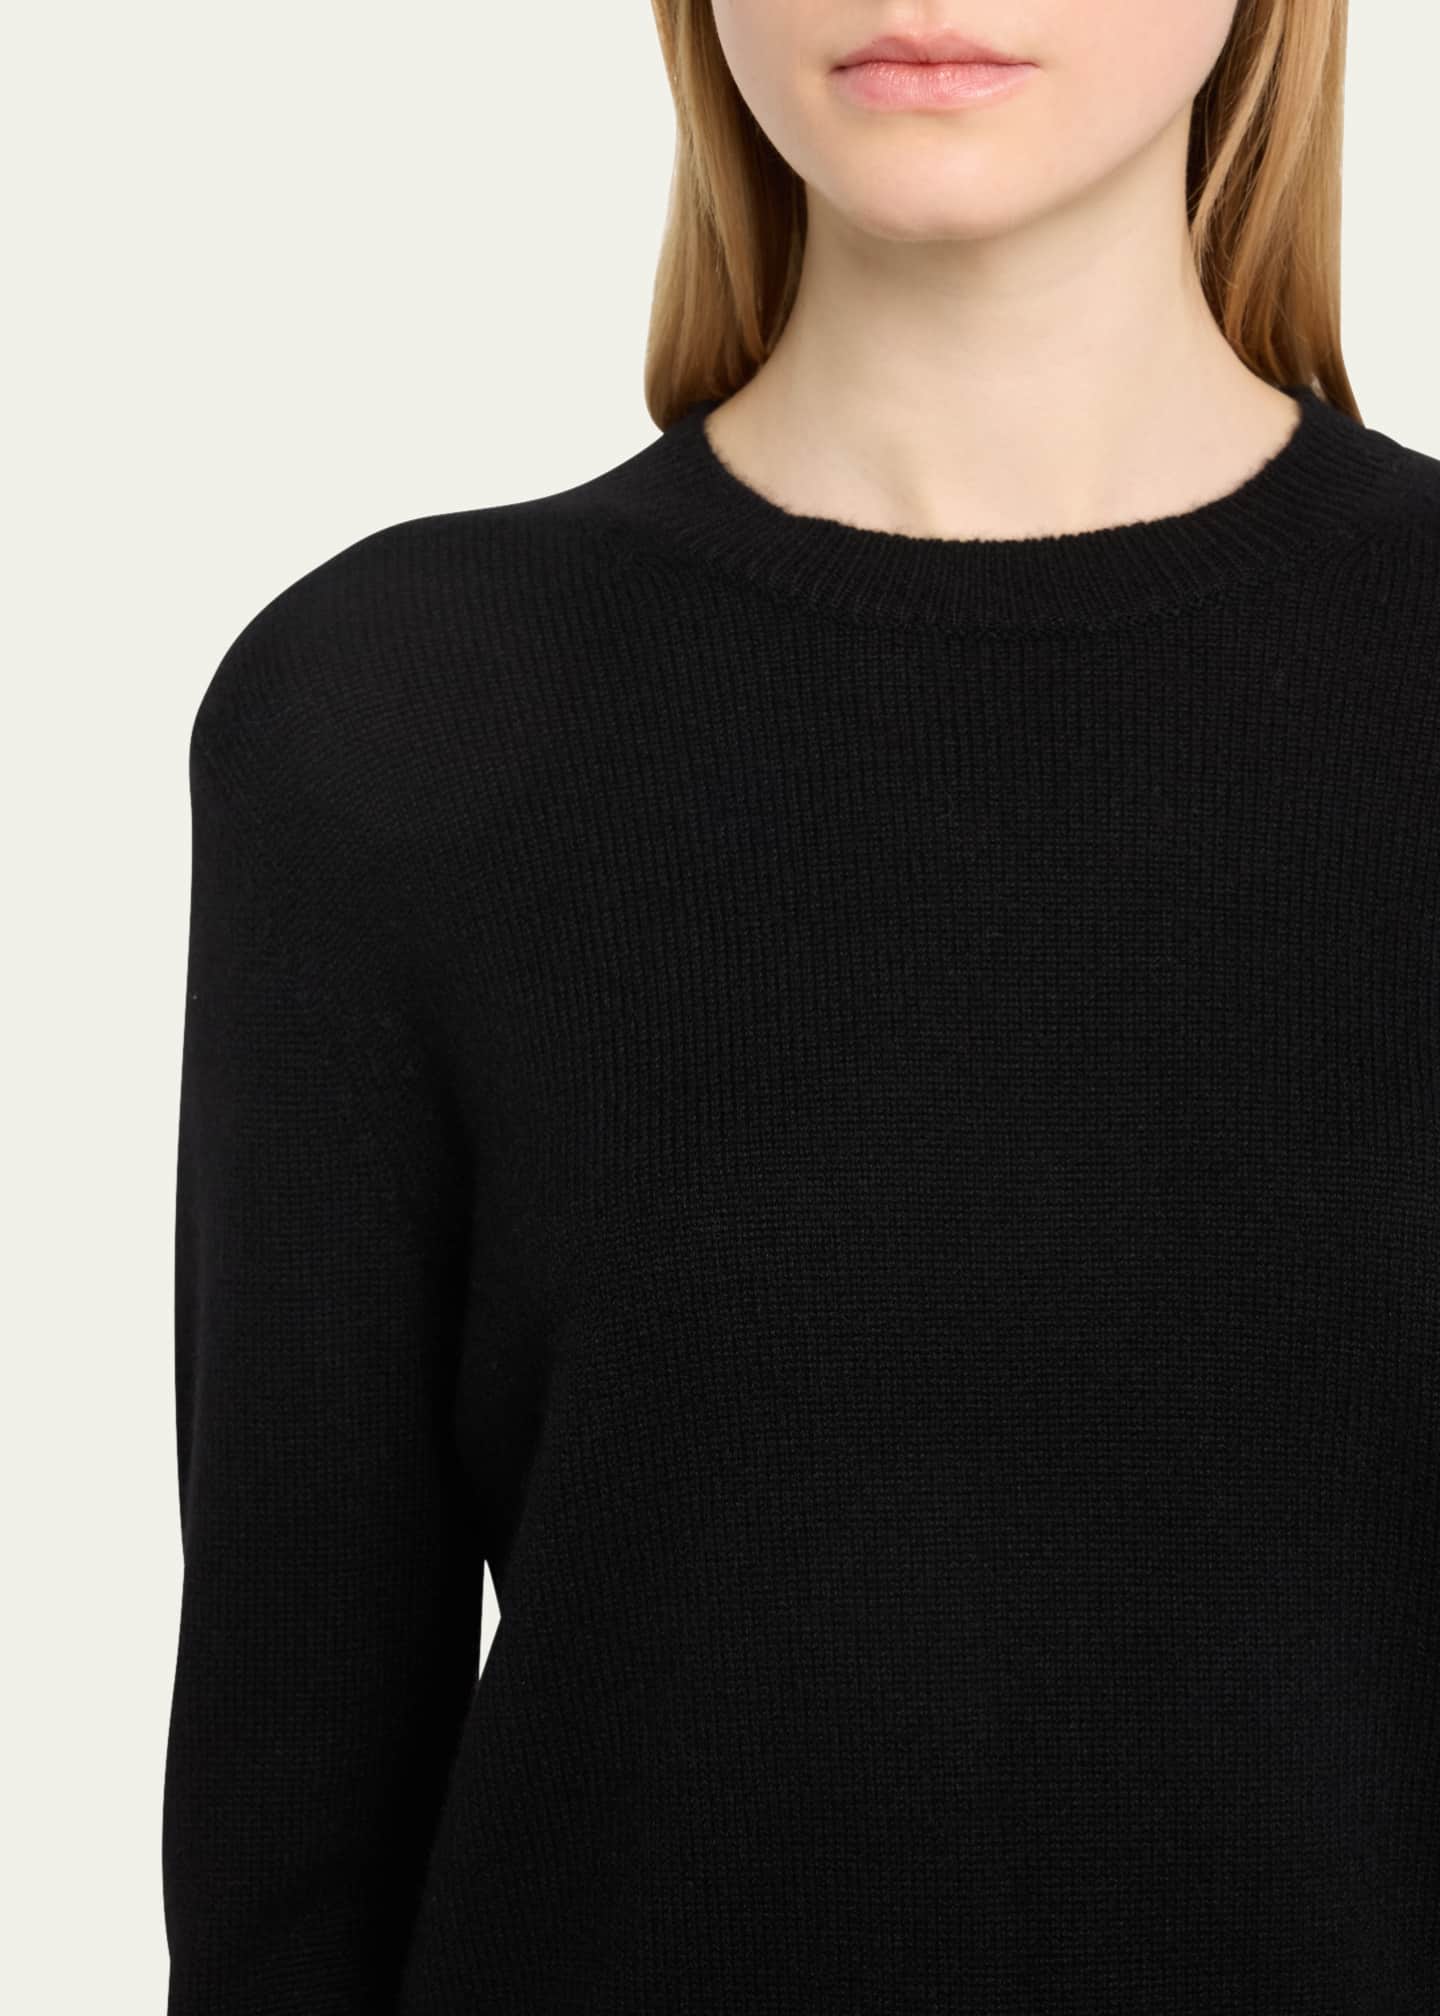 Lisa Yang The Mable Cashmere Cropped Sweater - Bergdorf Goodman